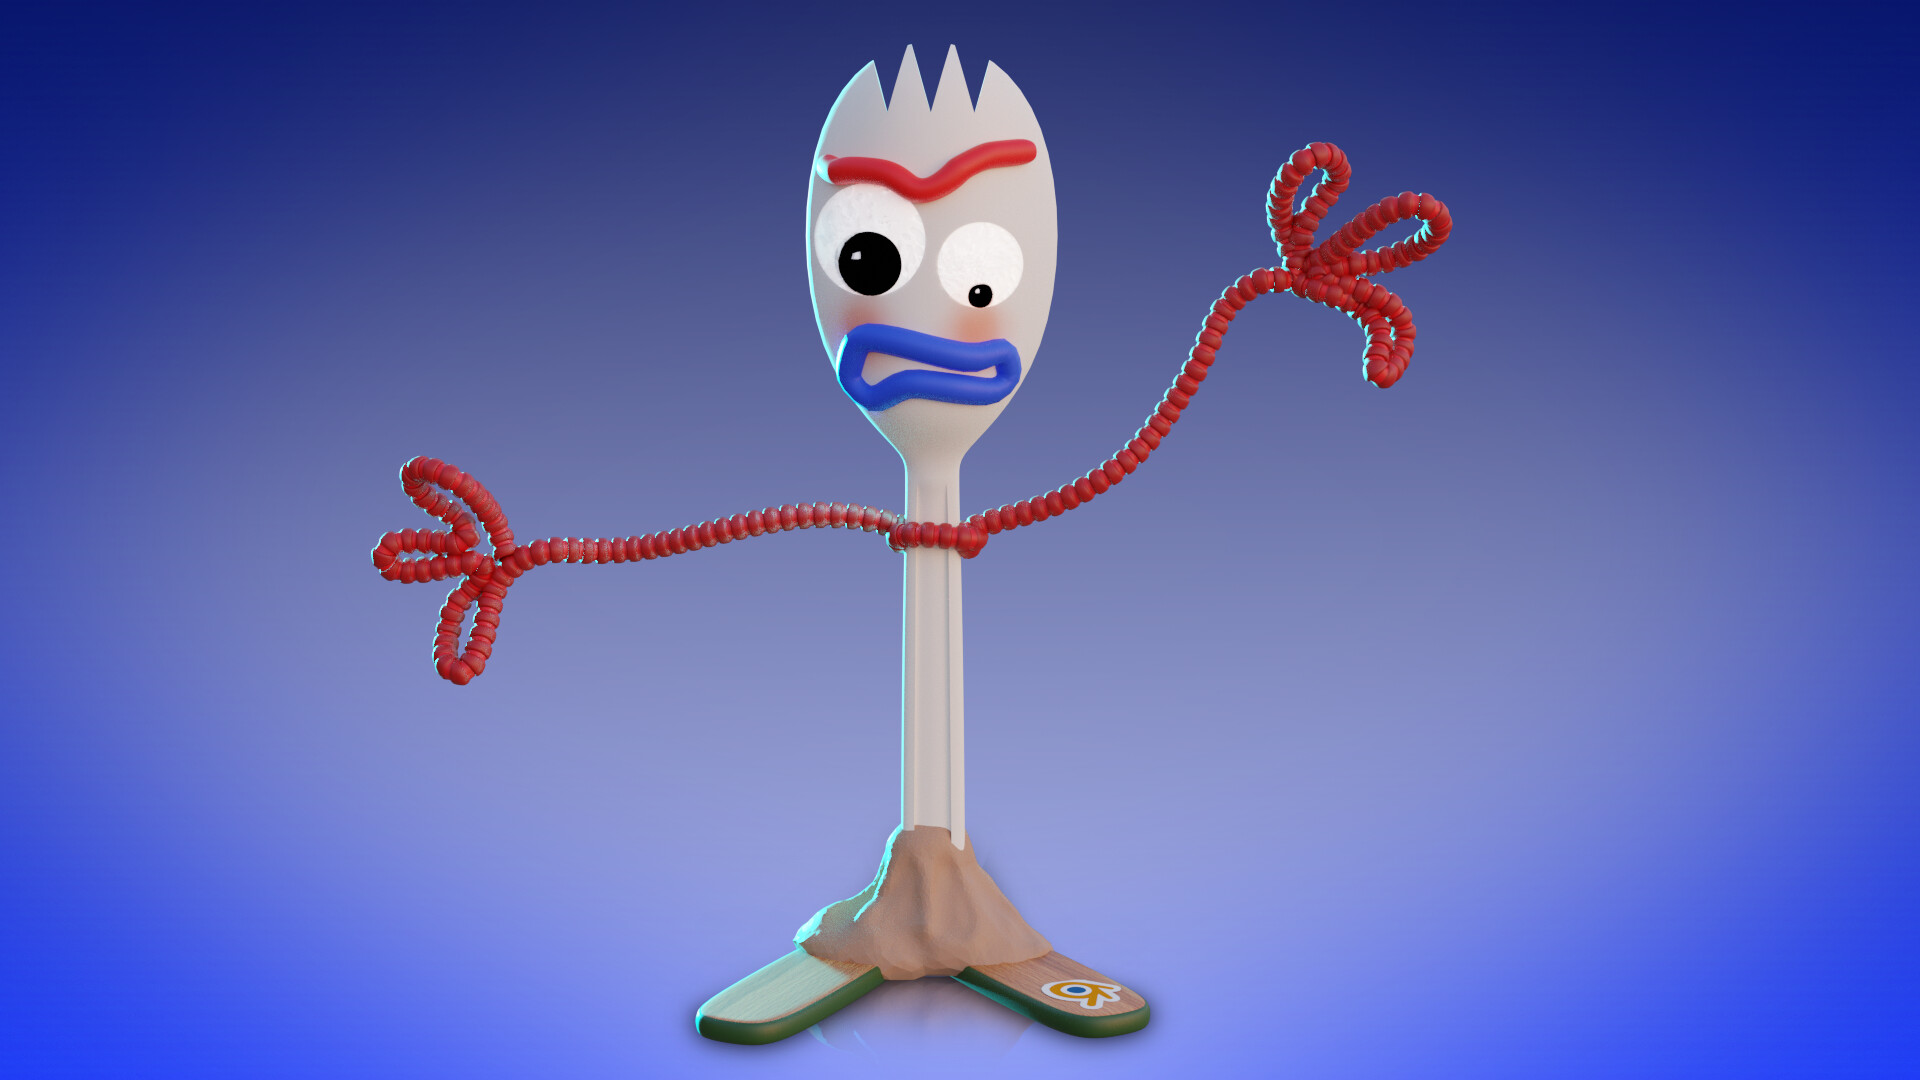 ArtStation - Forky From Toy Story 4